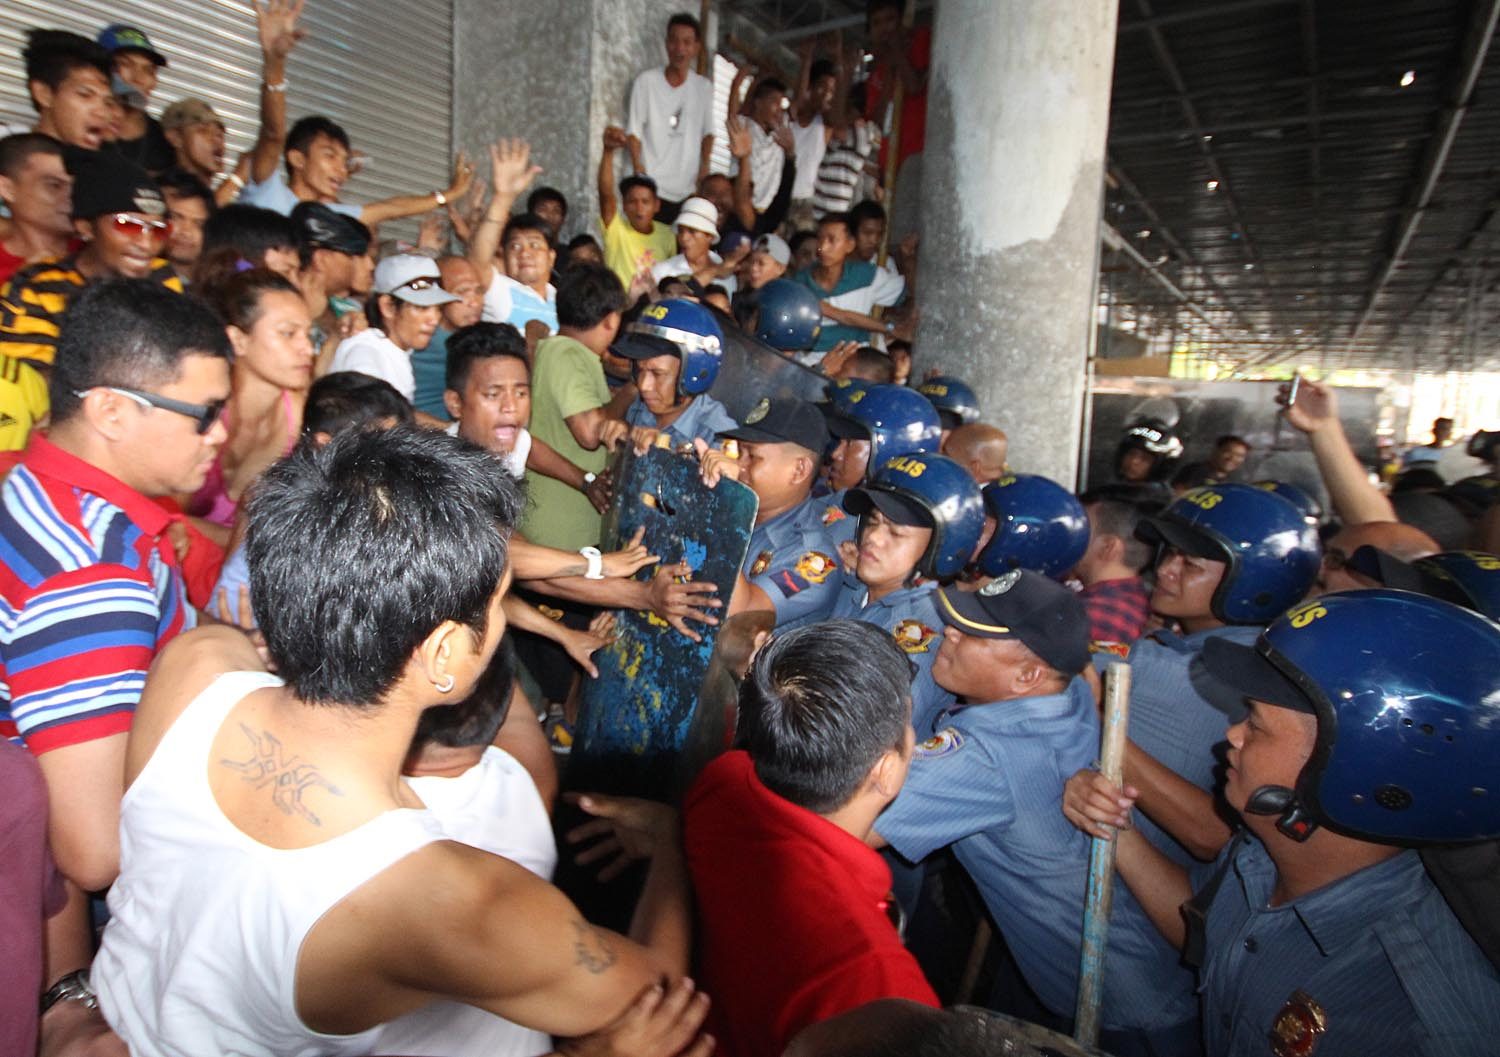 VP’s camp: Jamias’ men roughed up Binay supporters in Makati